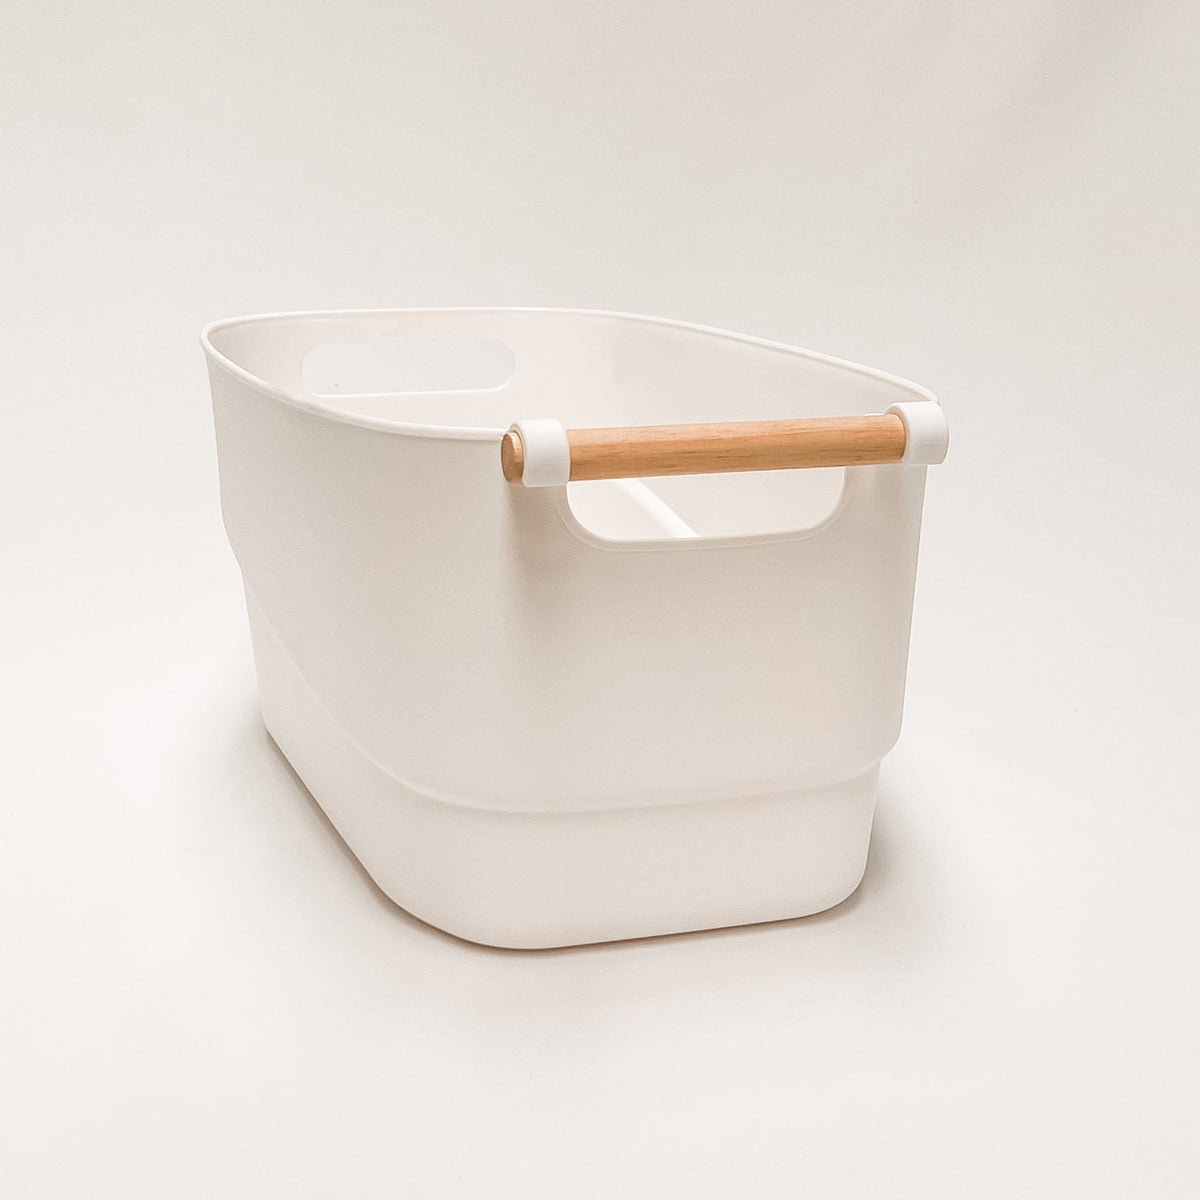 10.5LT White Organiser Tub with Wooden Handle